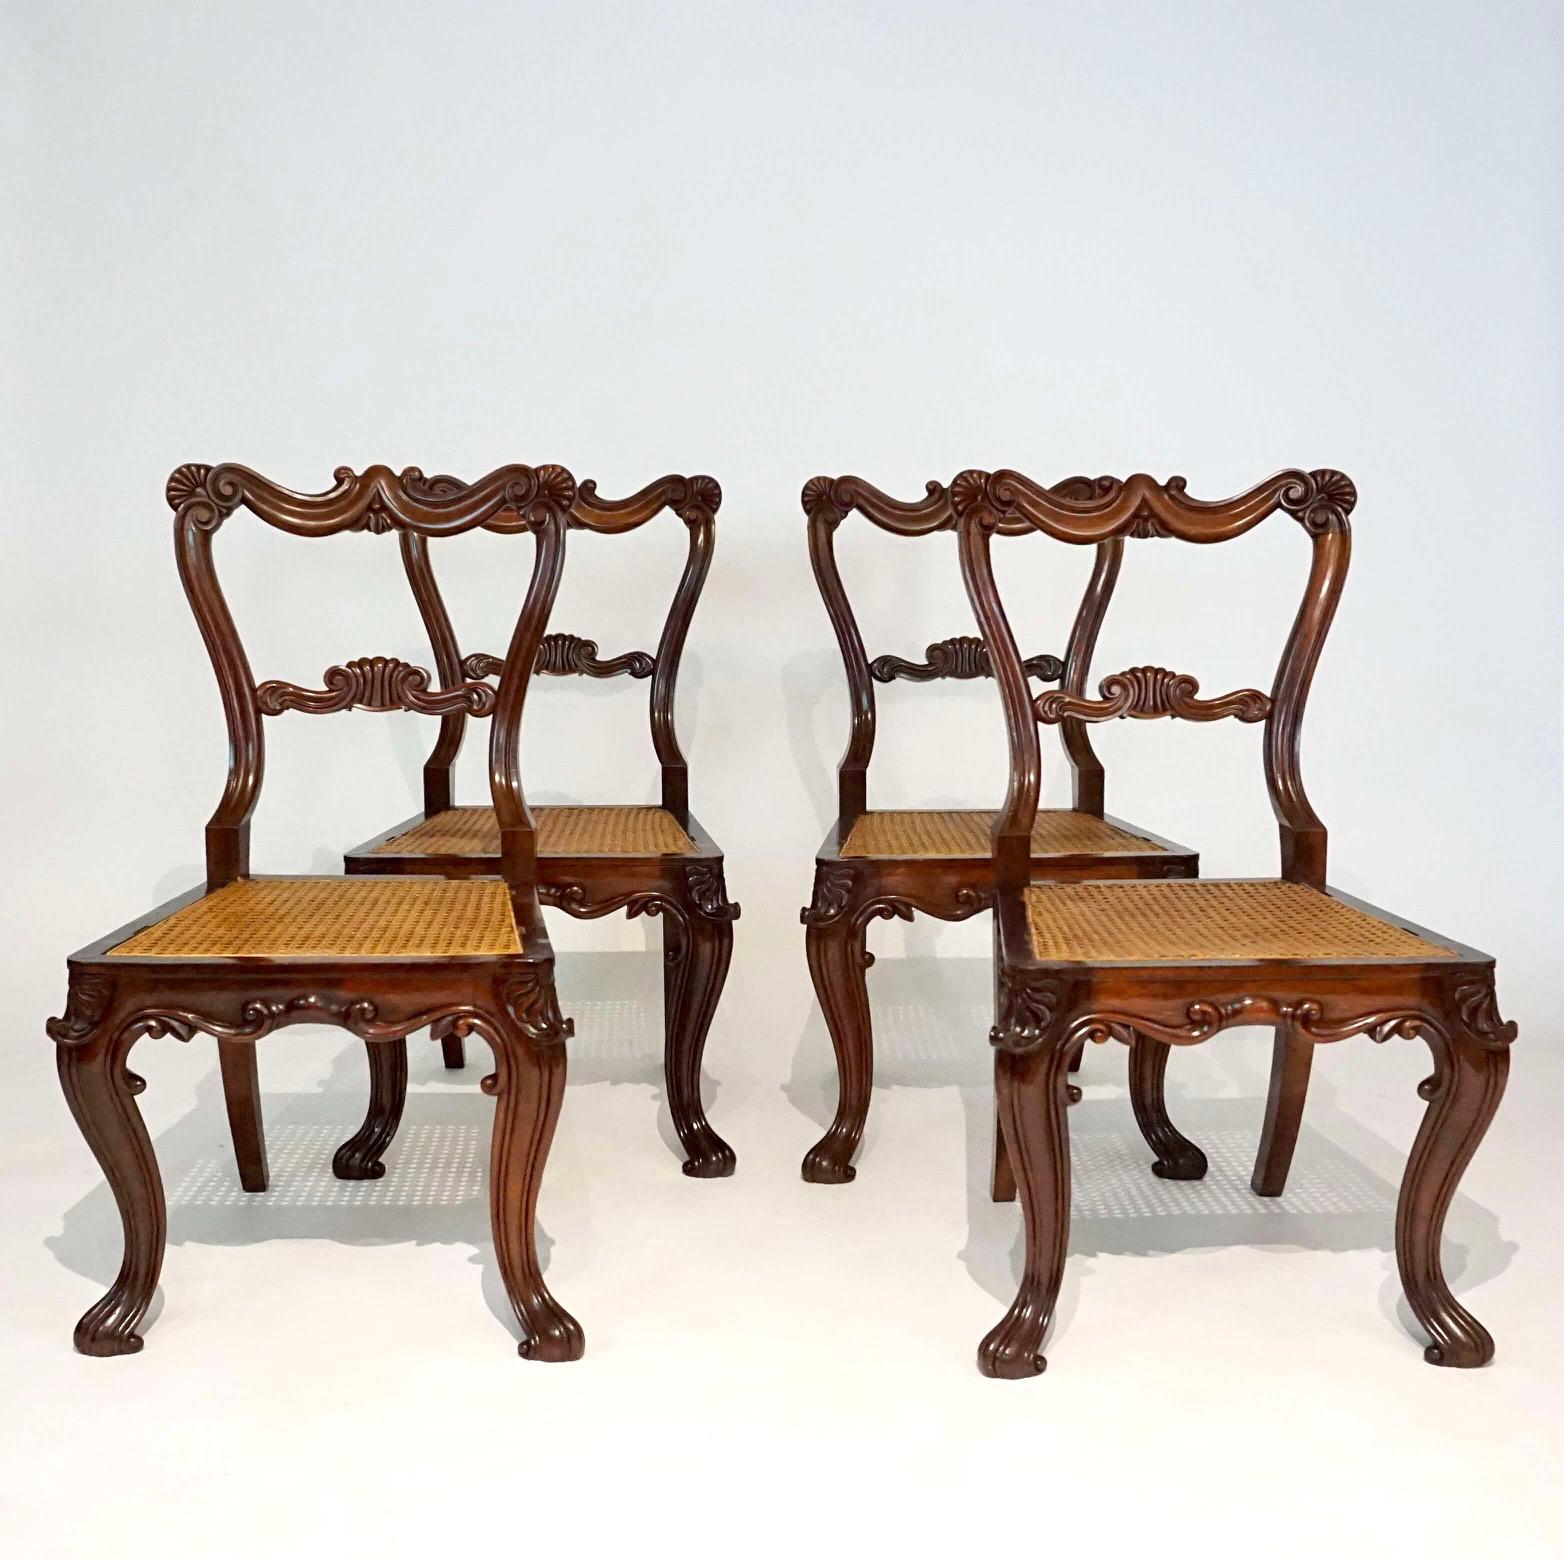 An exquisite set of four English George IV circa 1825 'First' Rococo Revival style side or dining chairs all signed by the legendary cabinetmaking firm Gillows of Lancaster having foliate and anthemion carved rosewood frames with caned seats.